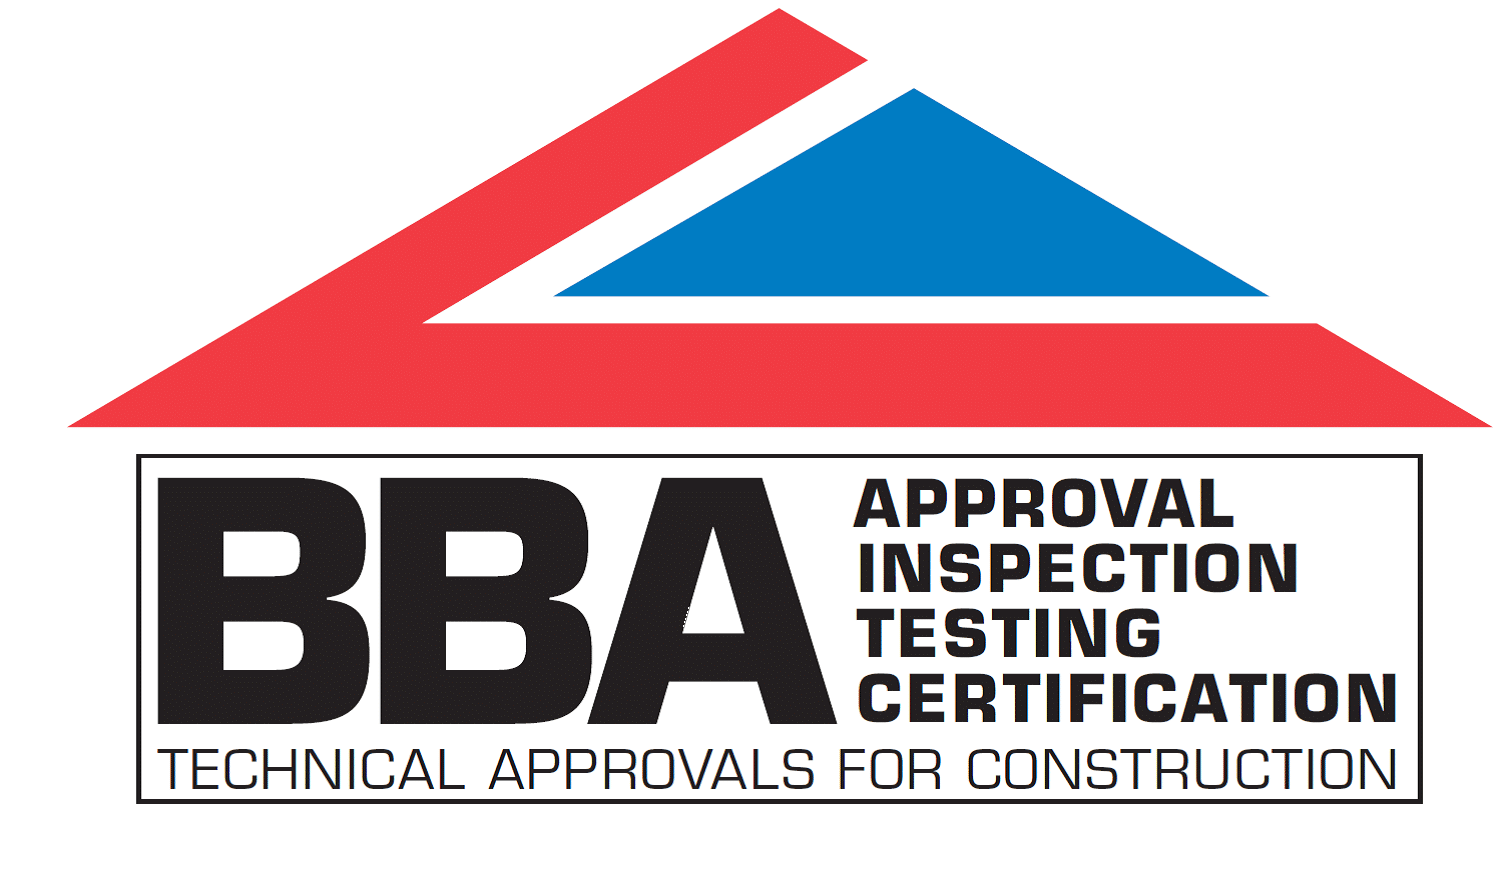 BBA agrement certifcate